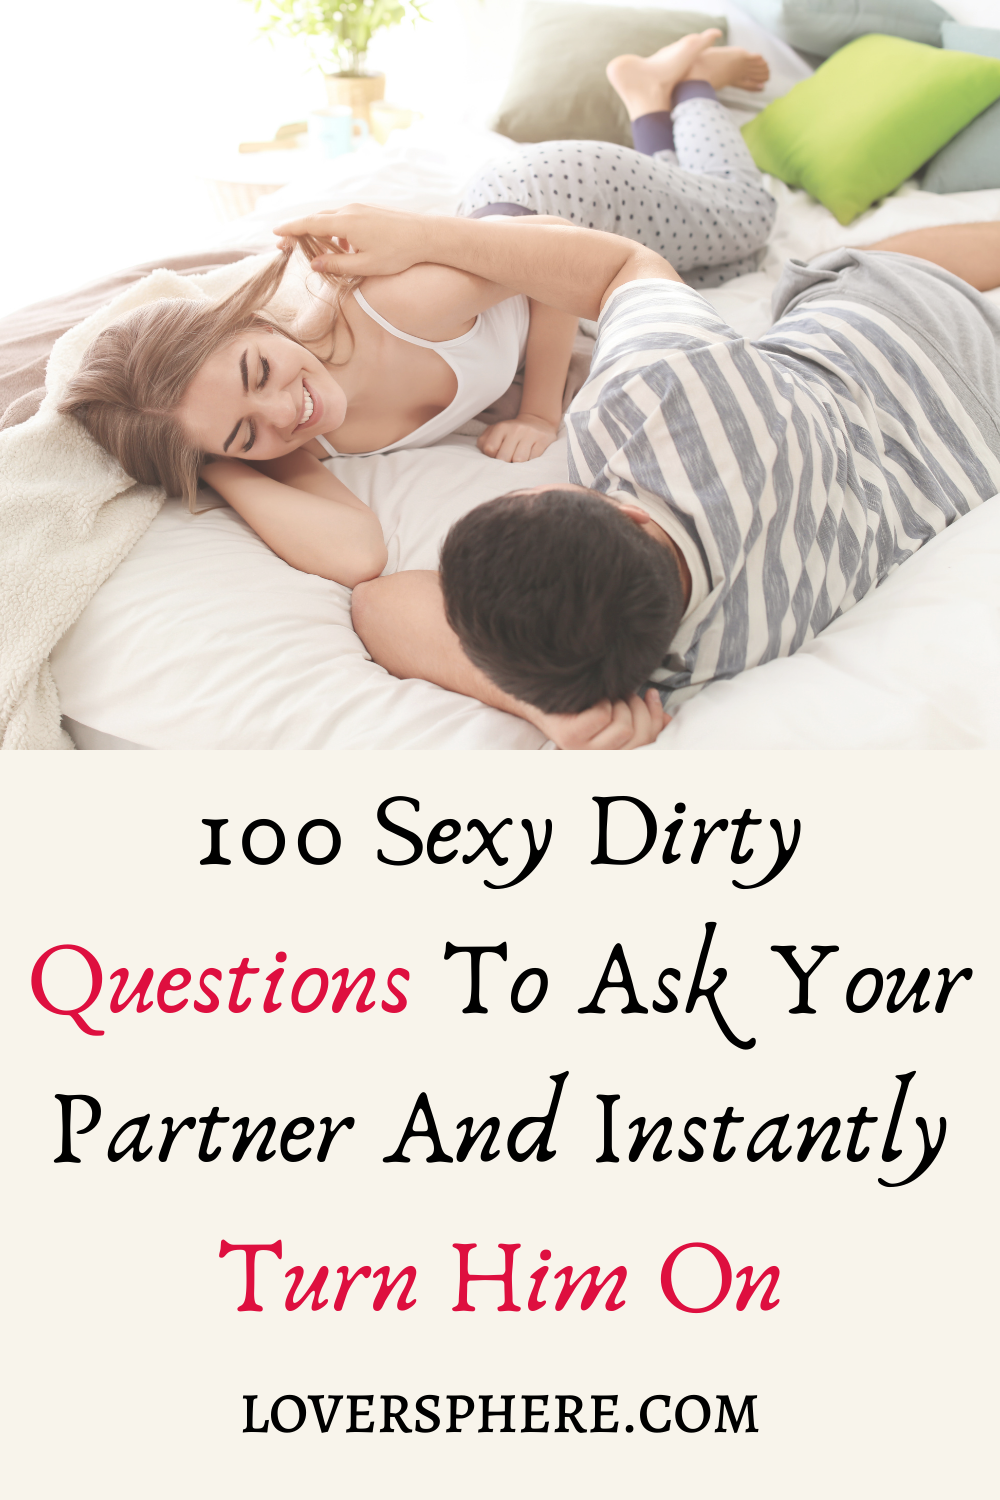 Dirty Questions To Ask Your Boyfriend To Turn Him On.